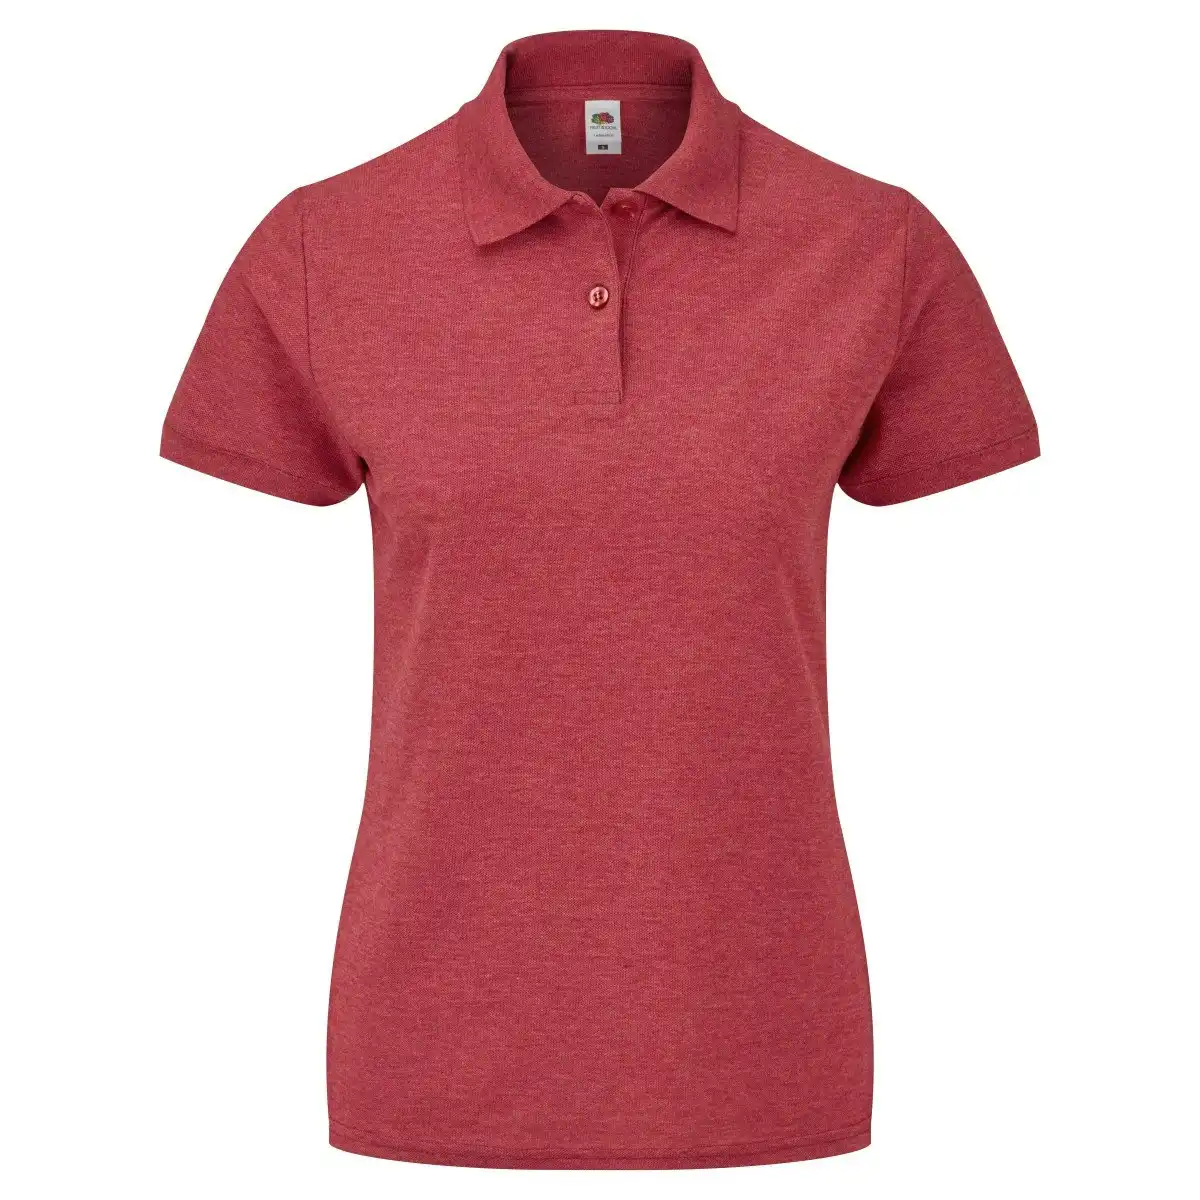 Fruit of the Loom Womens Lady-Fit 65/35 Short Sleeve Polo Shirt